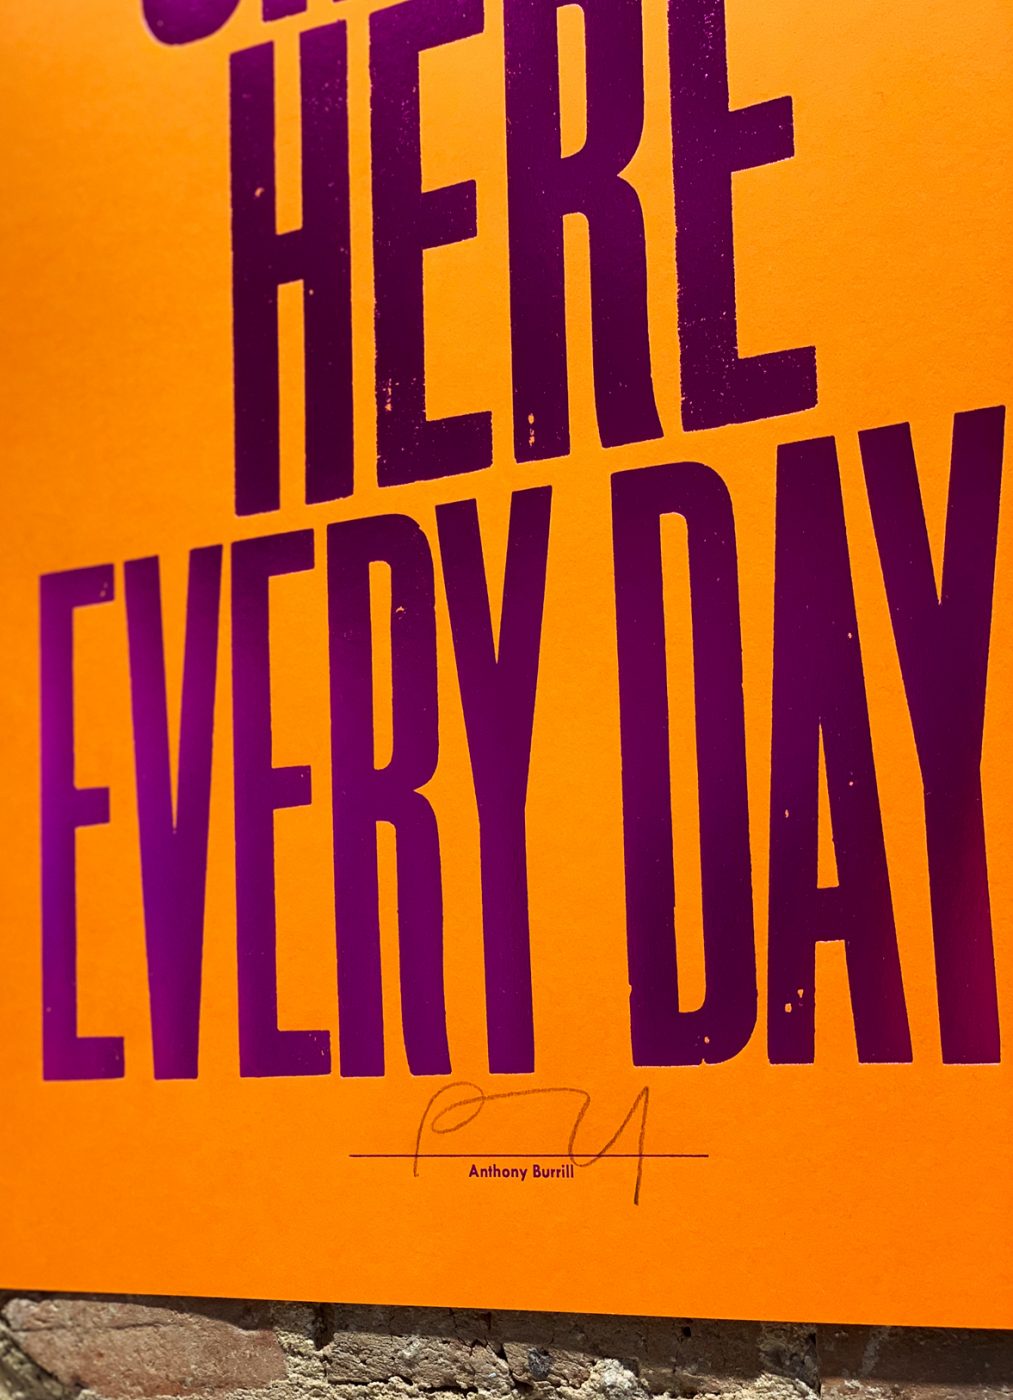 The Sun Shines Here Everyday - Orange by Anthony Burrill - Nelly Duff